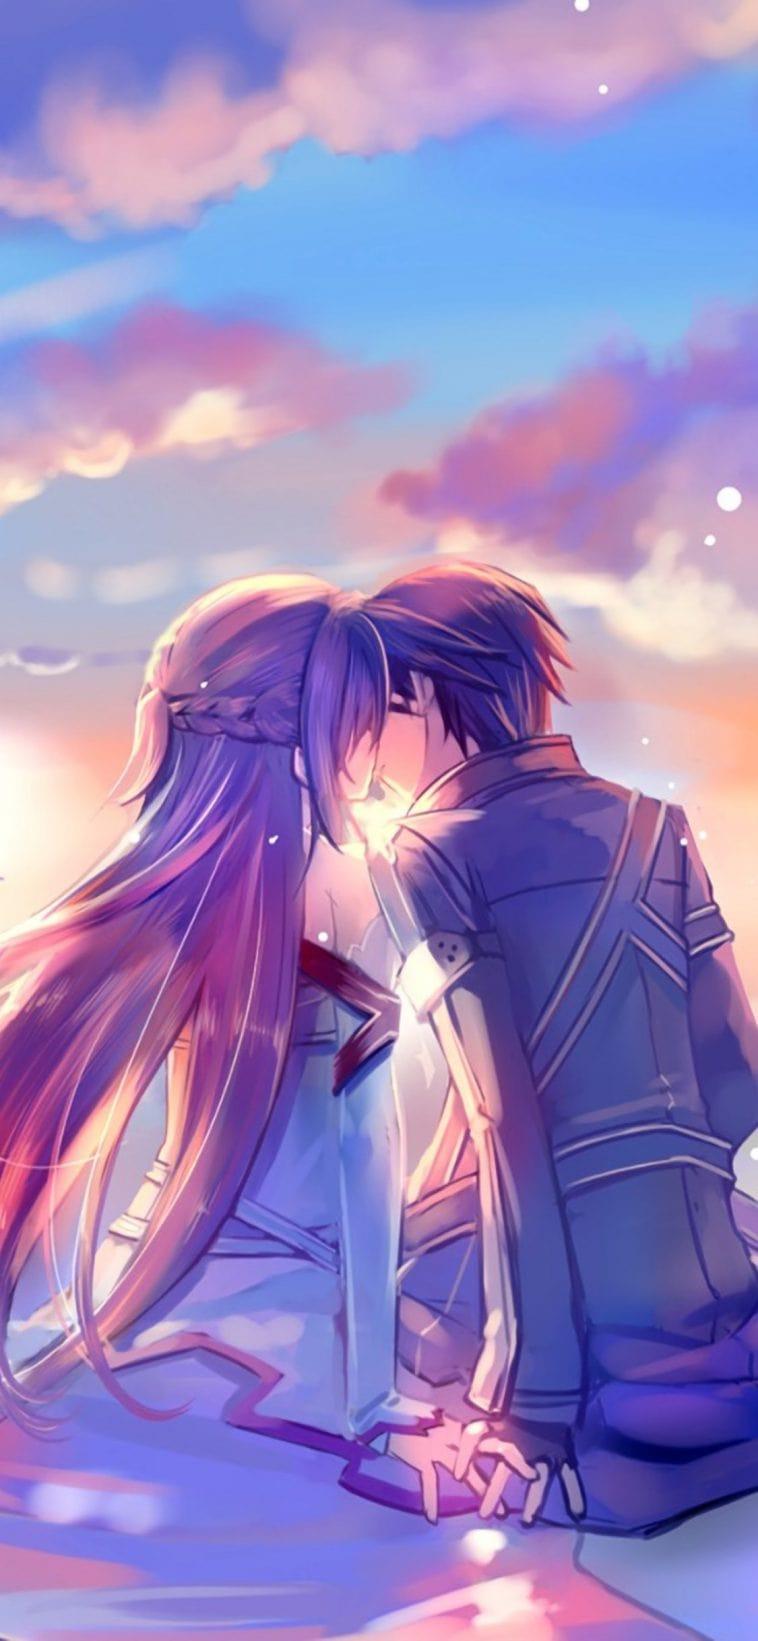 Wp5139305-anime-couple-art-hd-iphone-wallpapers by GirlIhavepowers on  DeviantArt